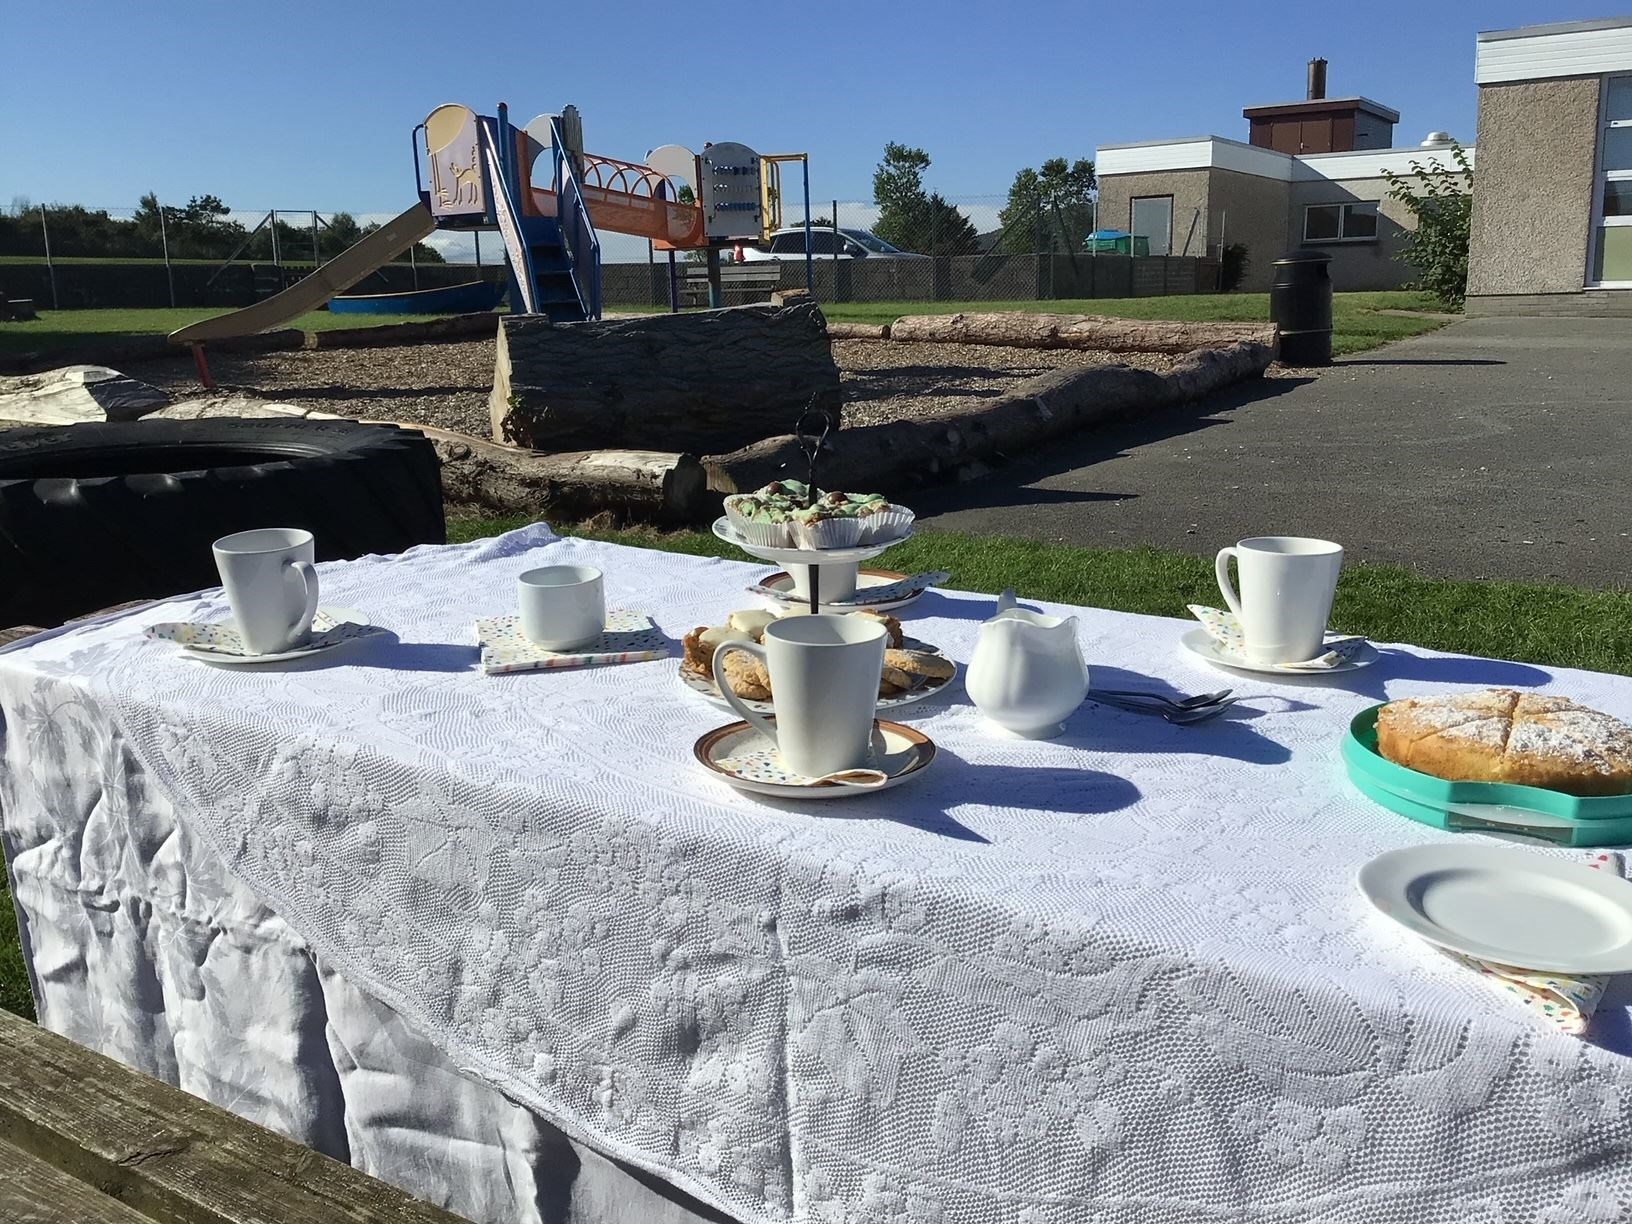 The scene is set for a cuppa and a chat. Picture: Cullen Primary